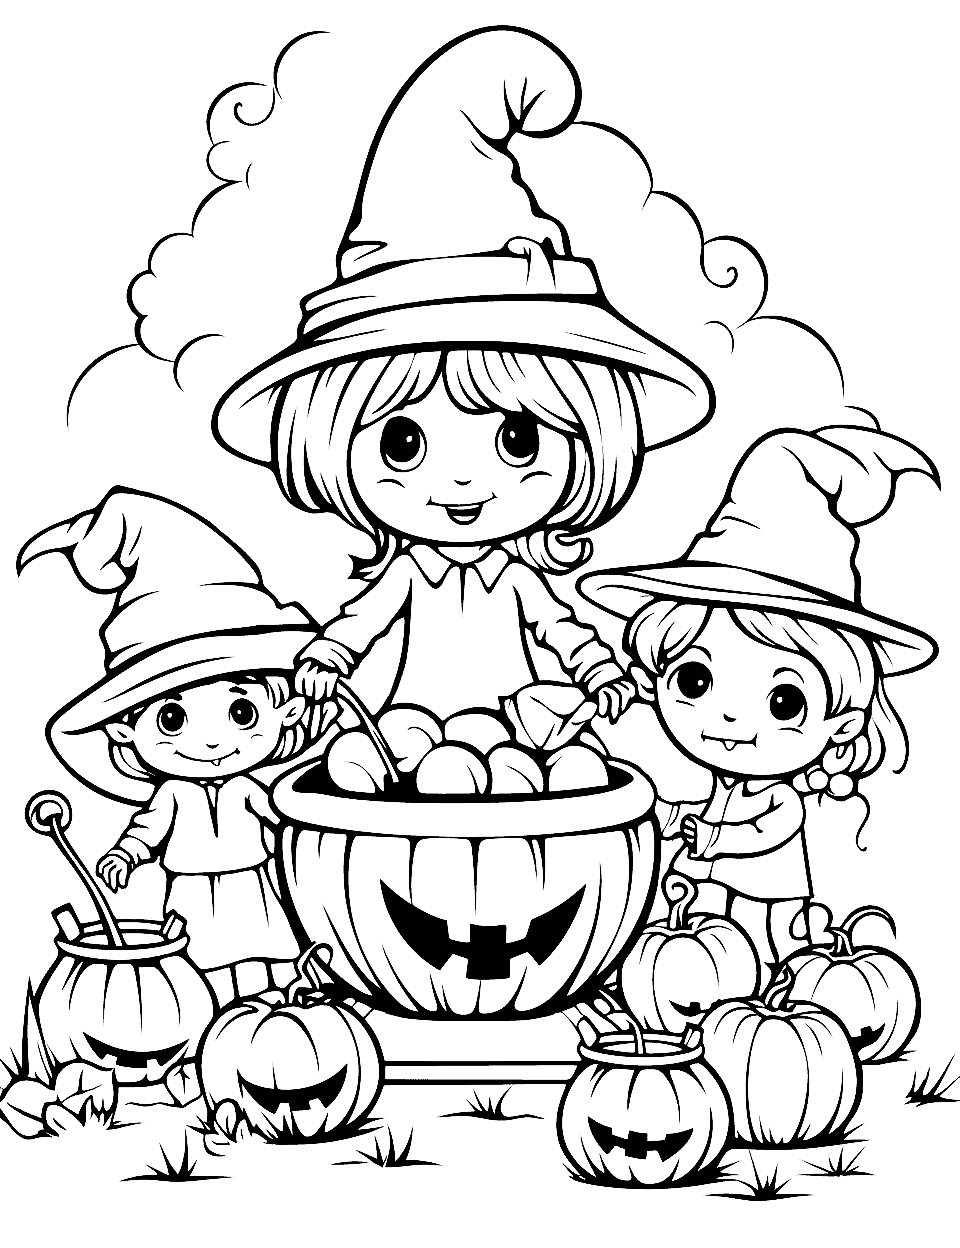 Halloween Witch Gathering Coloring Page - A group of friendly witches around a cauldron during Halloween, brewing a potion.